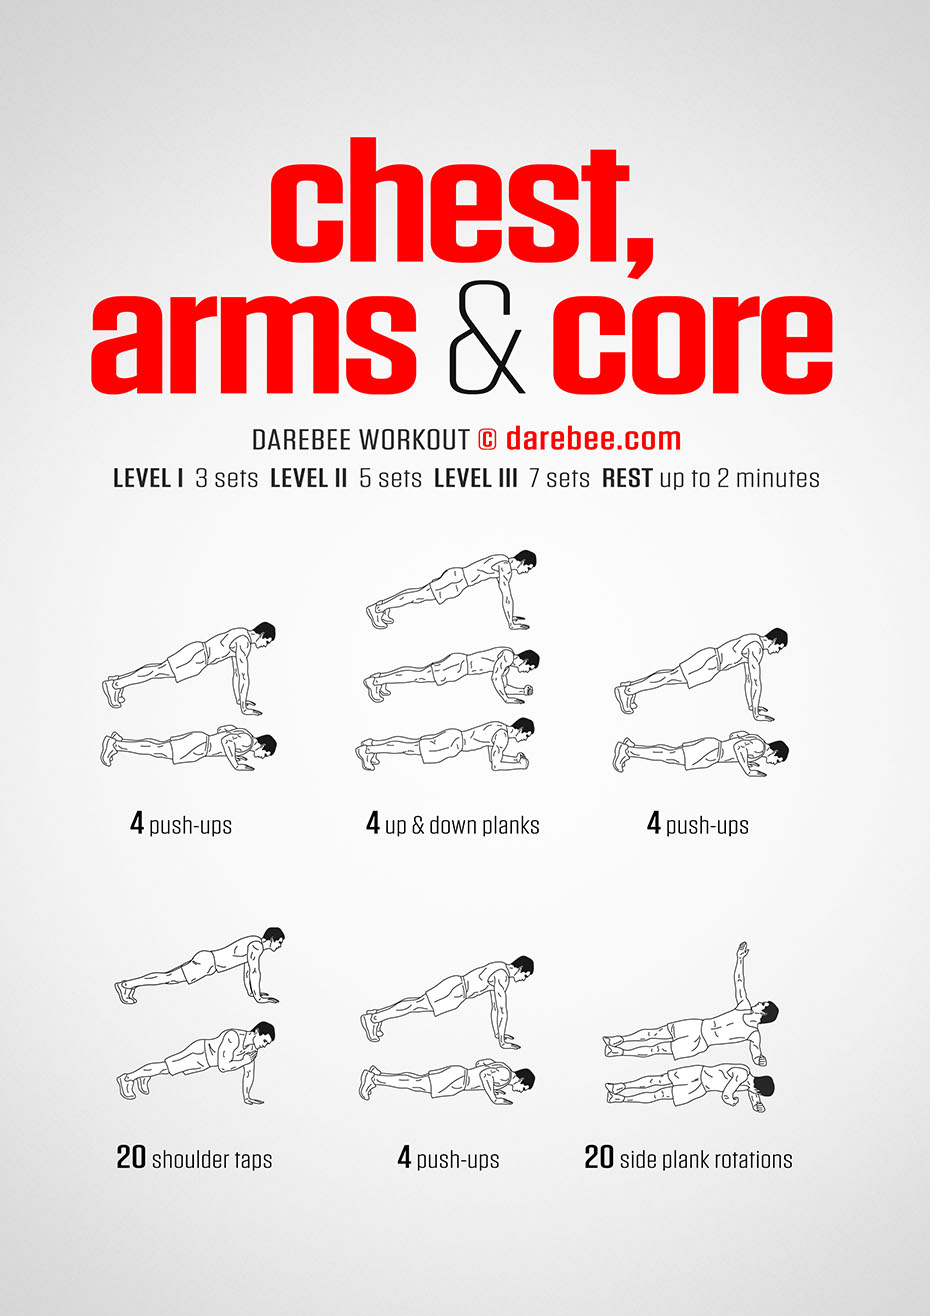 https://darebee.com/images/workouts/chest-arms-and-core-workout.jpg